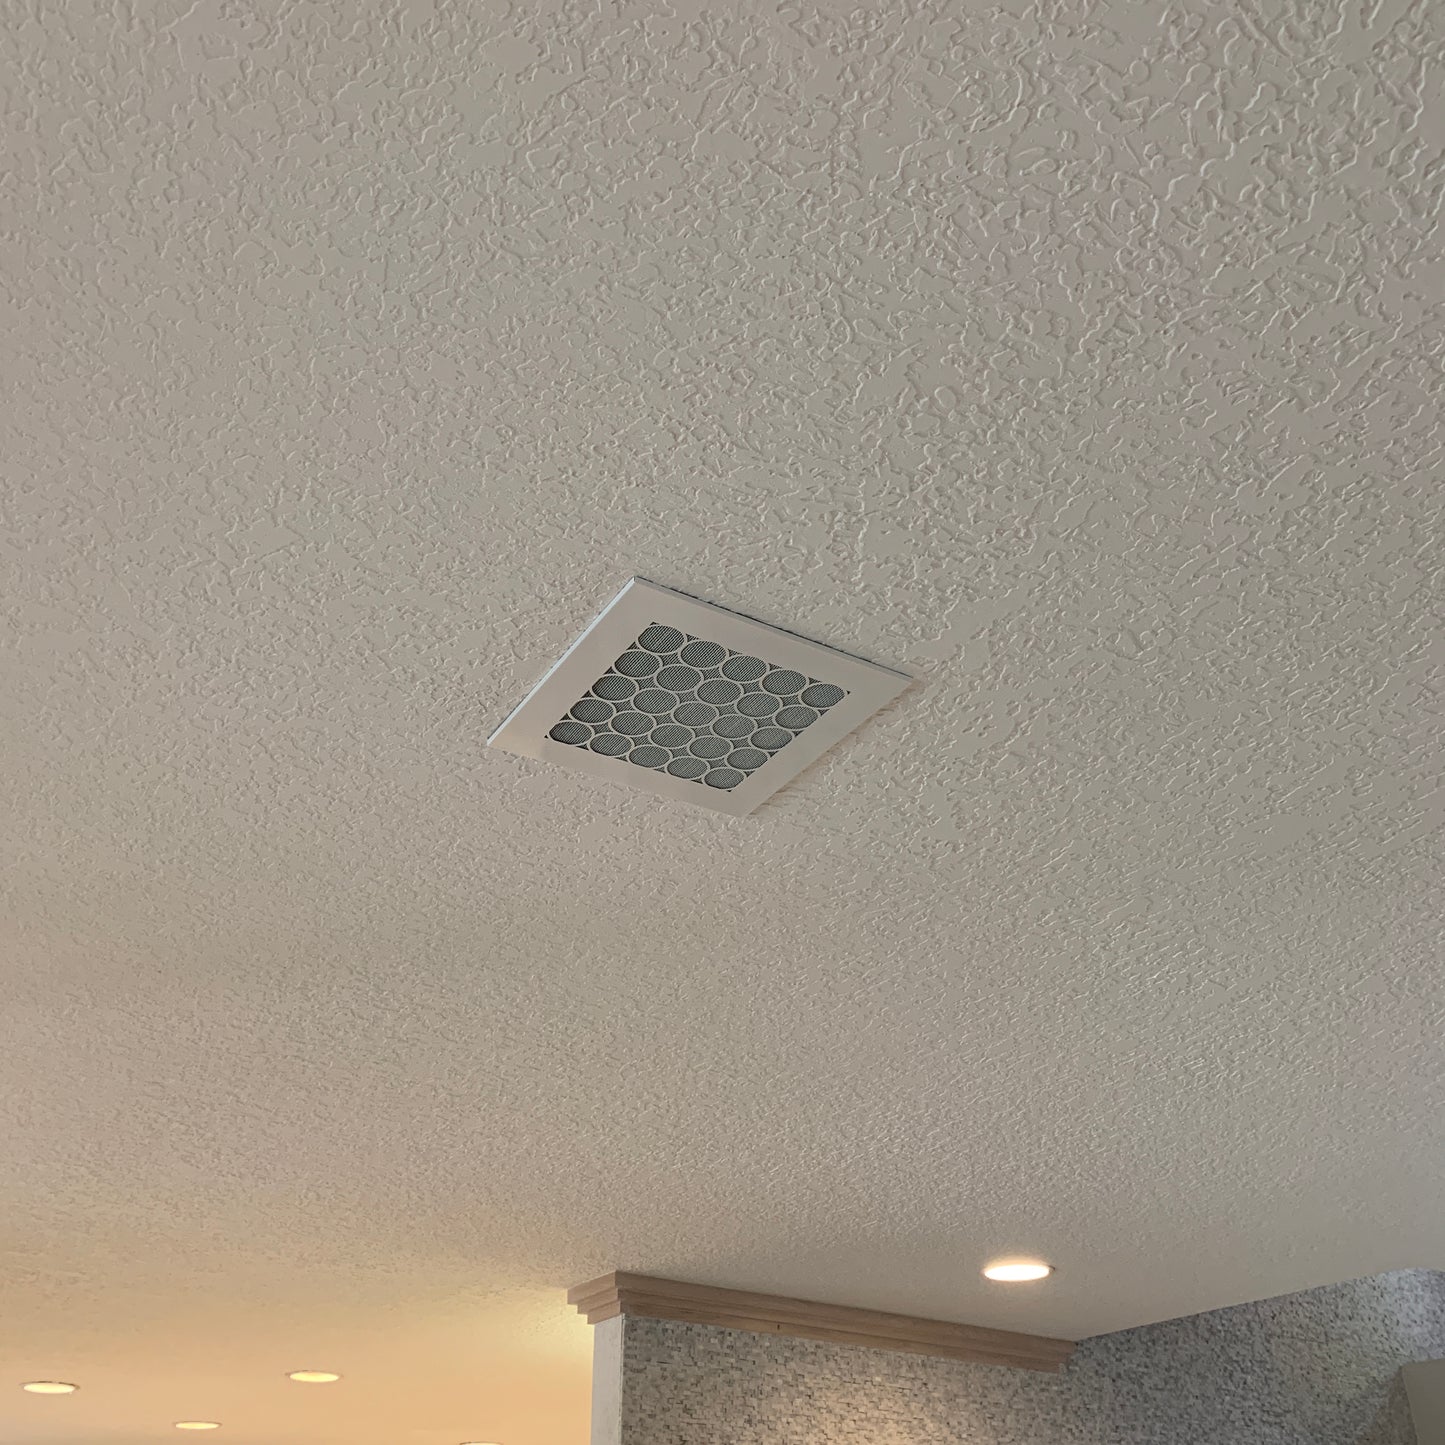 AC ceiling vent - CleanVent MidCentury Pattern